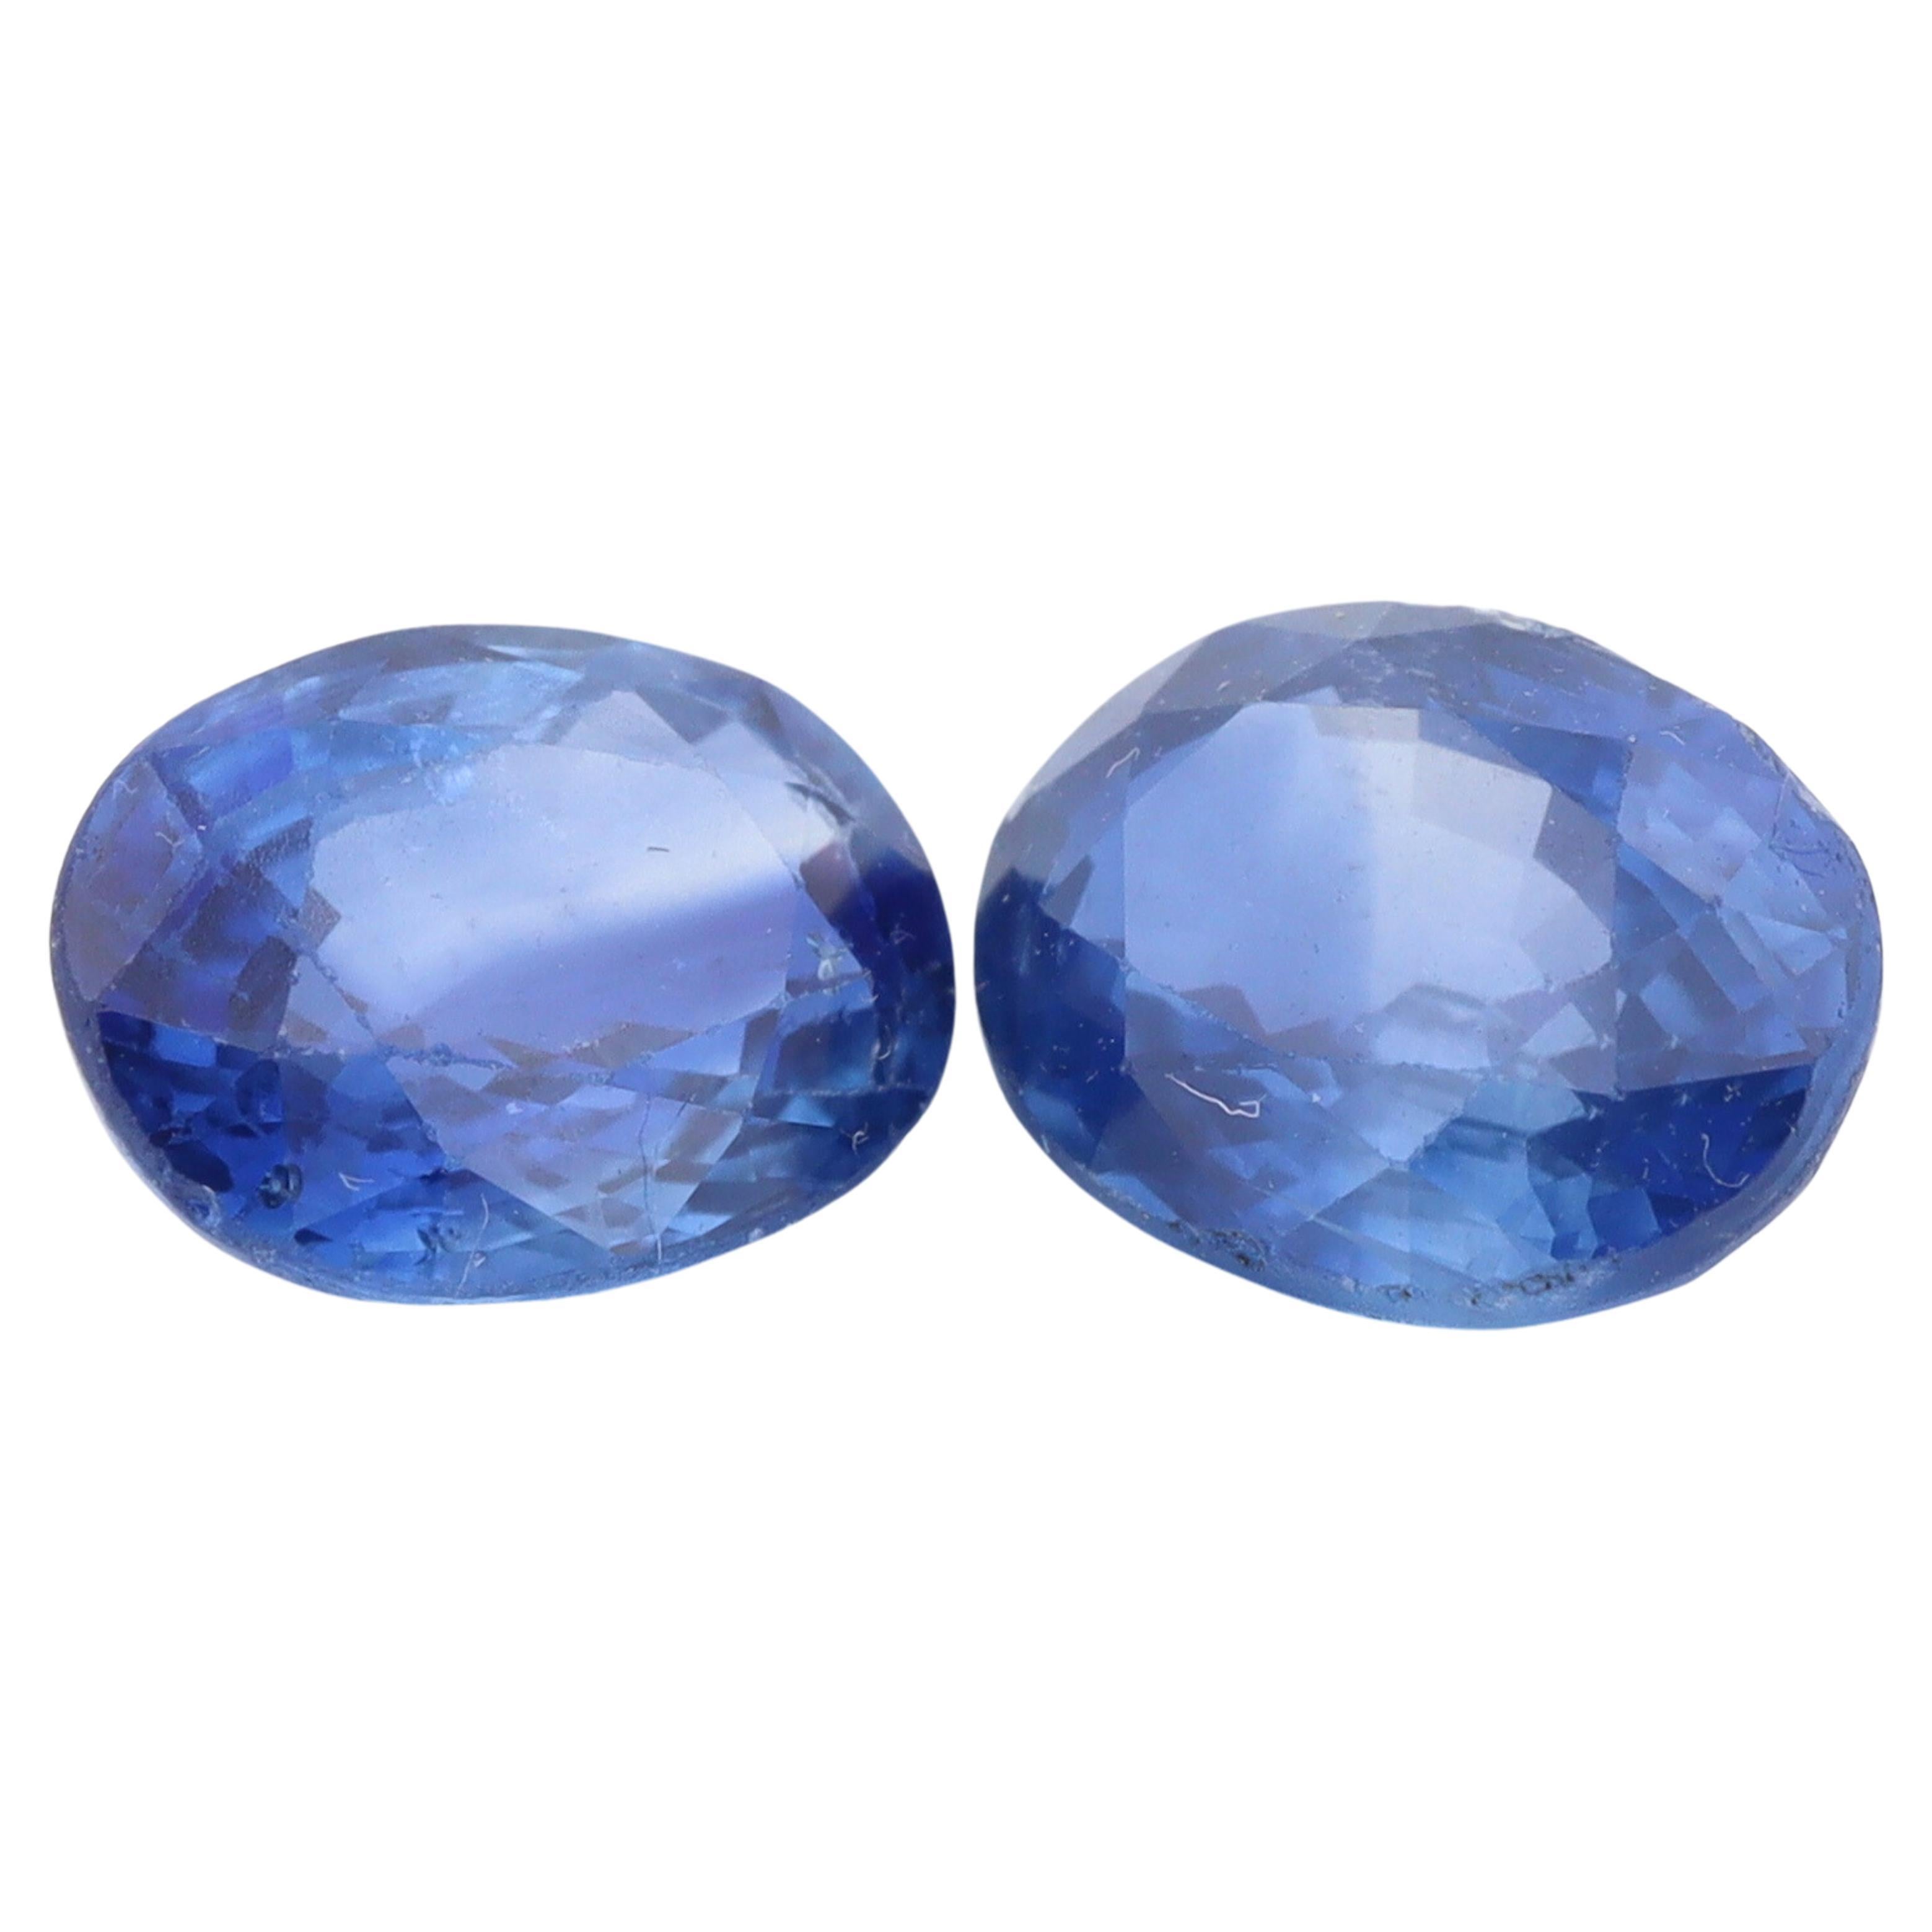 Certified Pair of Oval Blue Sapphires from Sri Lanka - 2.82ct For Sale